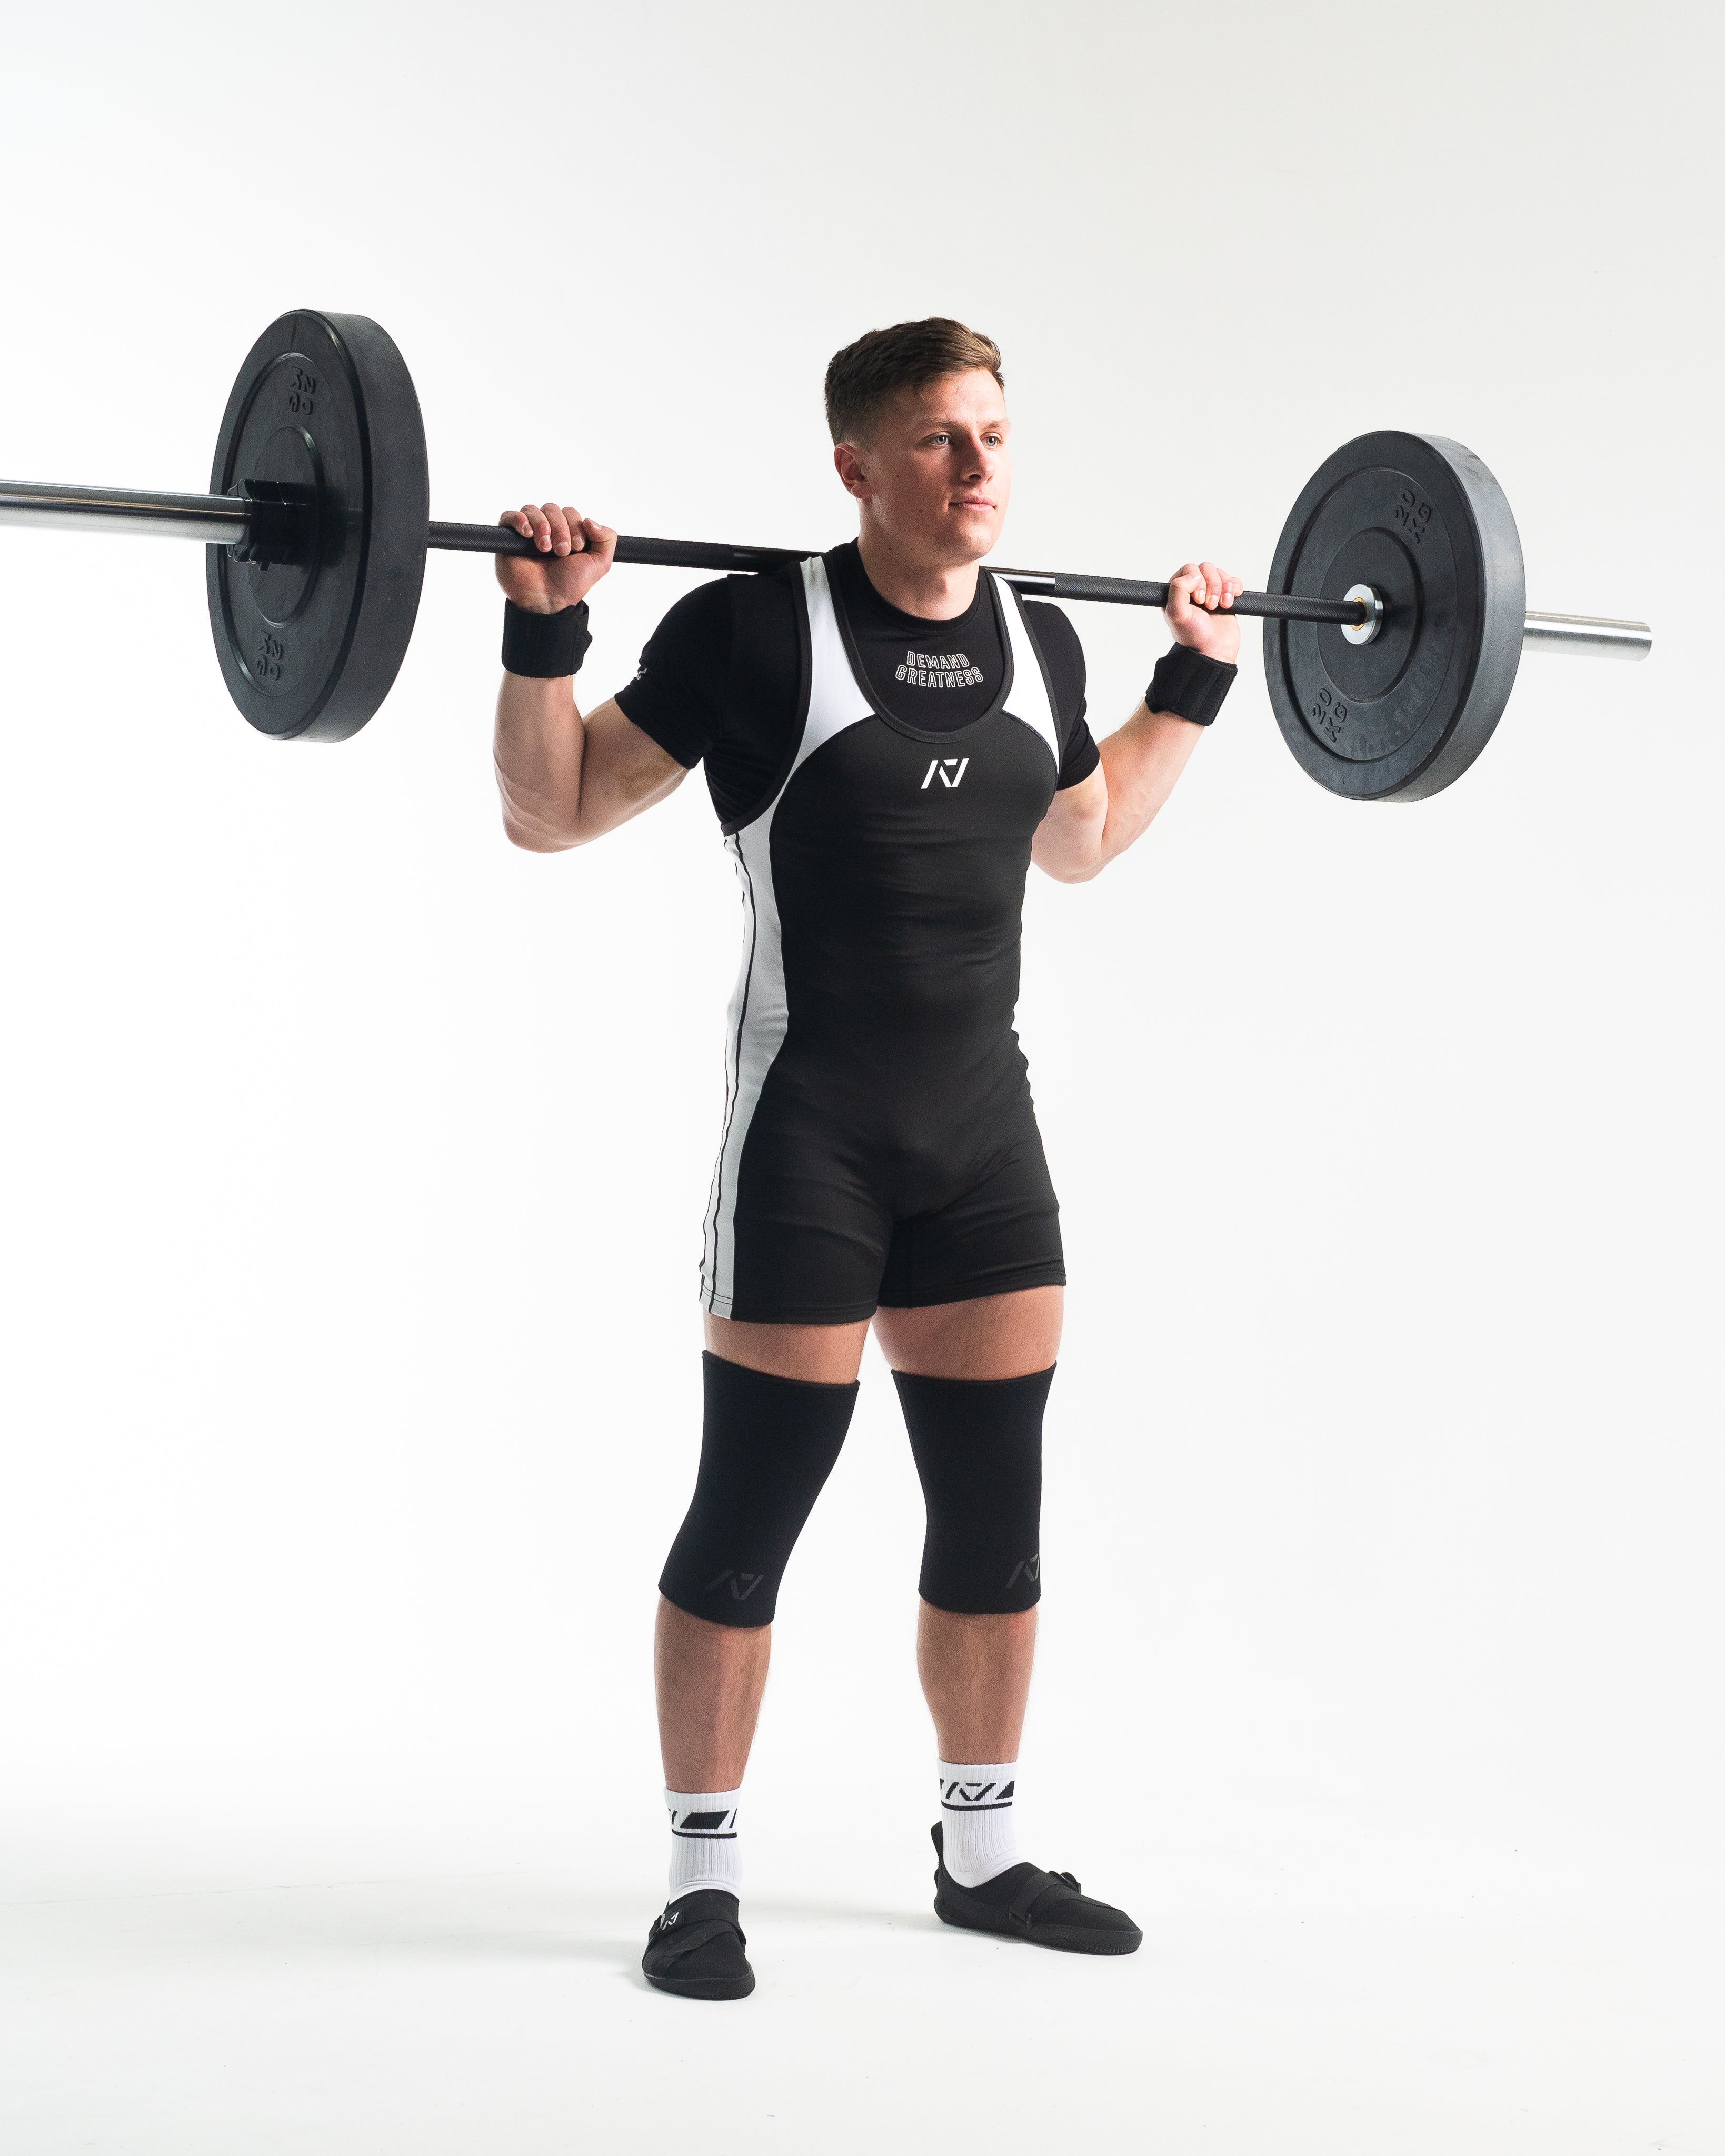 A7 IPF Approved Domino Luno singlet features extra lat mobility, side panel stitching to guide the squat depth level and curved panel design for a slimming look. The Women's cut singlet features a tapered waist and additional quad room. The IPF Approved Kit includes Luno Powerlifting Singlet, A7 Meet Shirt, A7 Zebra Wrist Wraps, A7 Deadlift Socks, Hourglass Knee Sleeves (Stiff Knee Sleeves and Rigor Mortis Knee Sleeves). All A7 Powerlifting Equipment shipping to UK, Norway, Switzerland and Iceland.